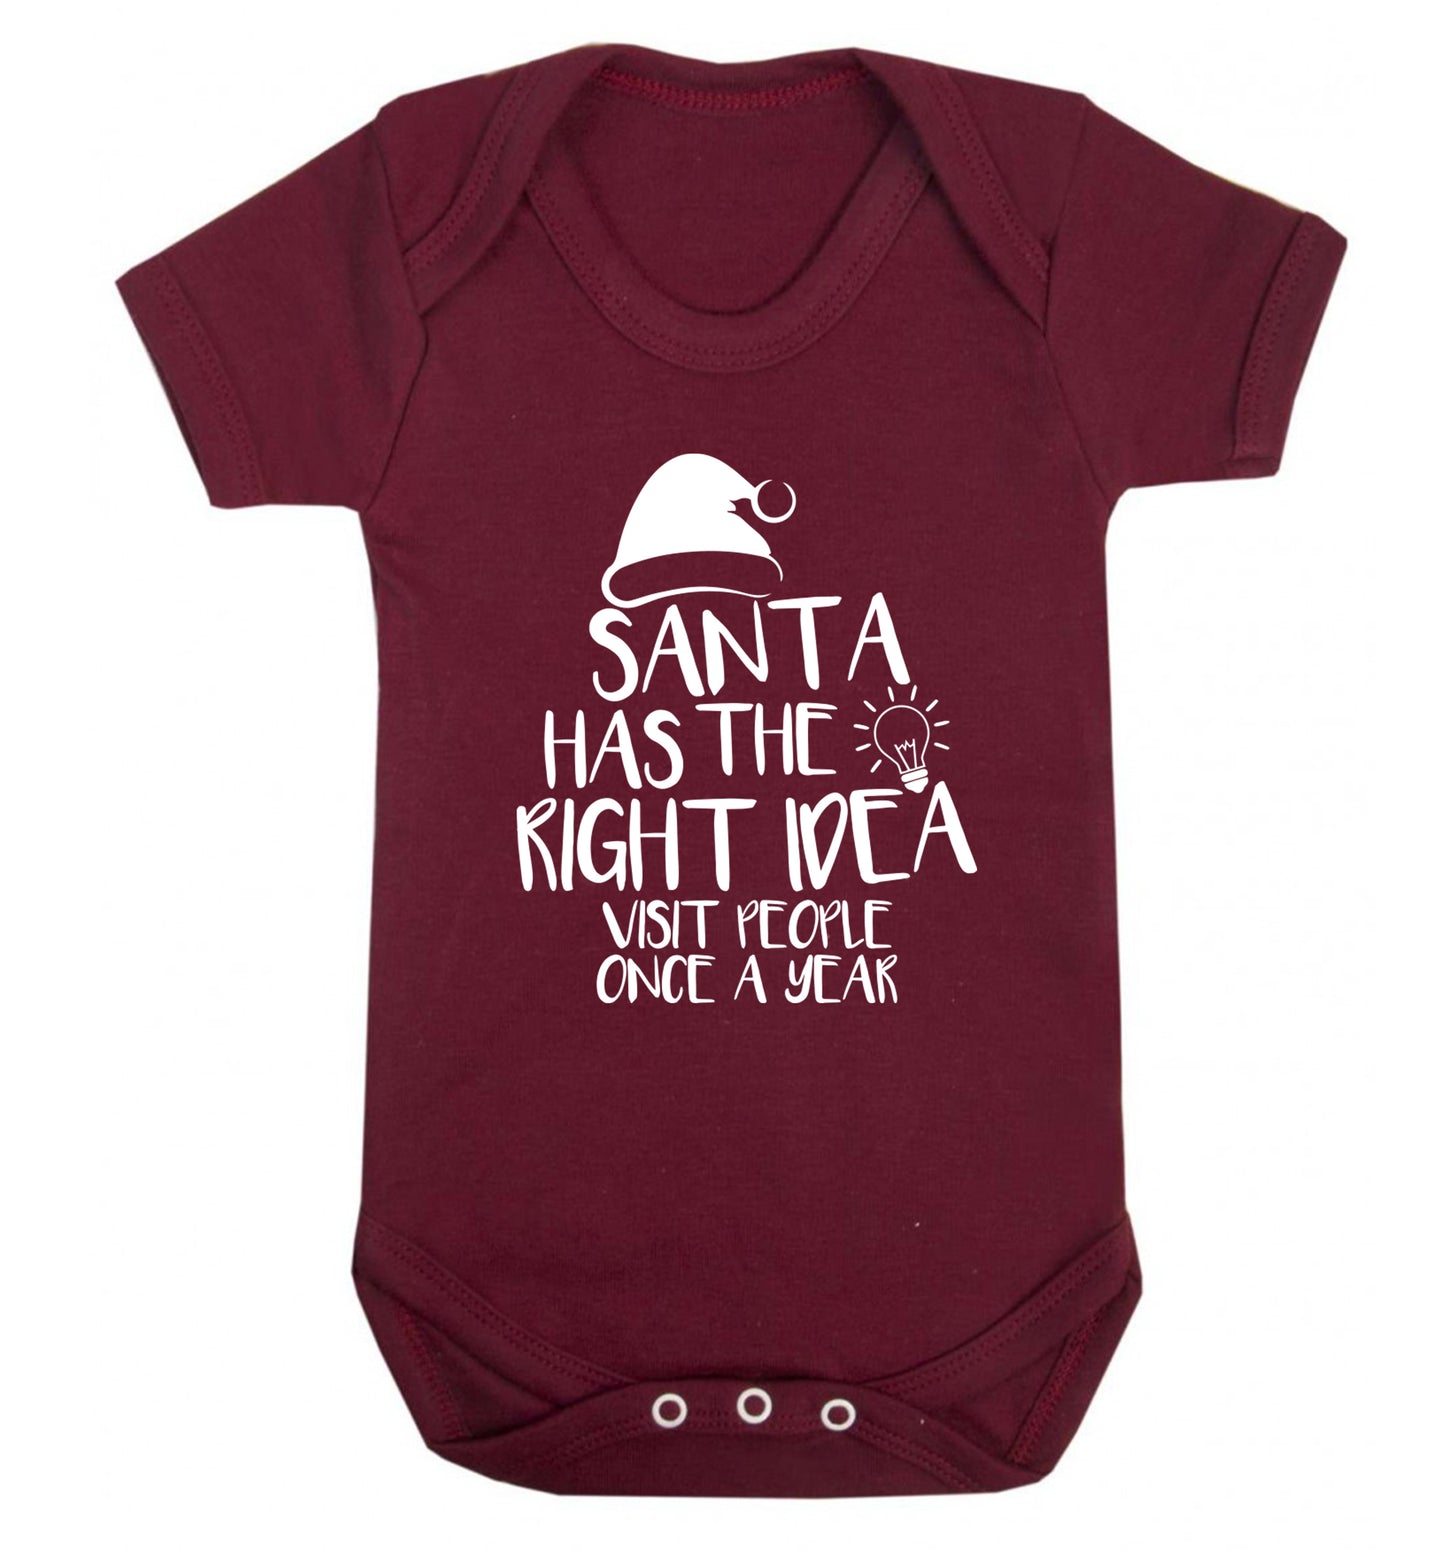 Santa has the right idea visit people once a year Baby Vest maroon 18-24 months